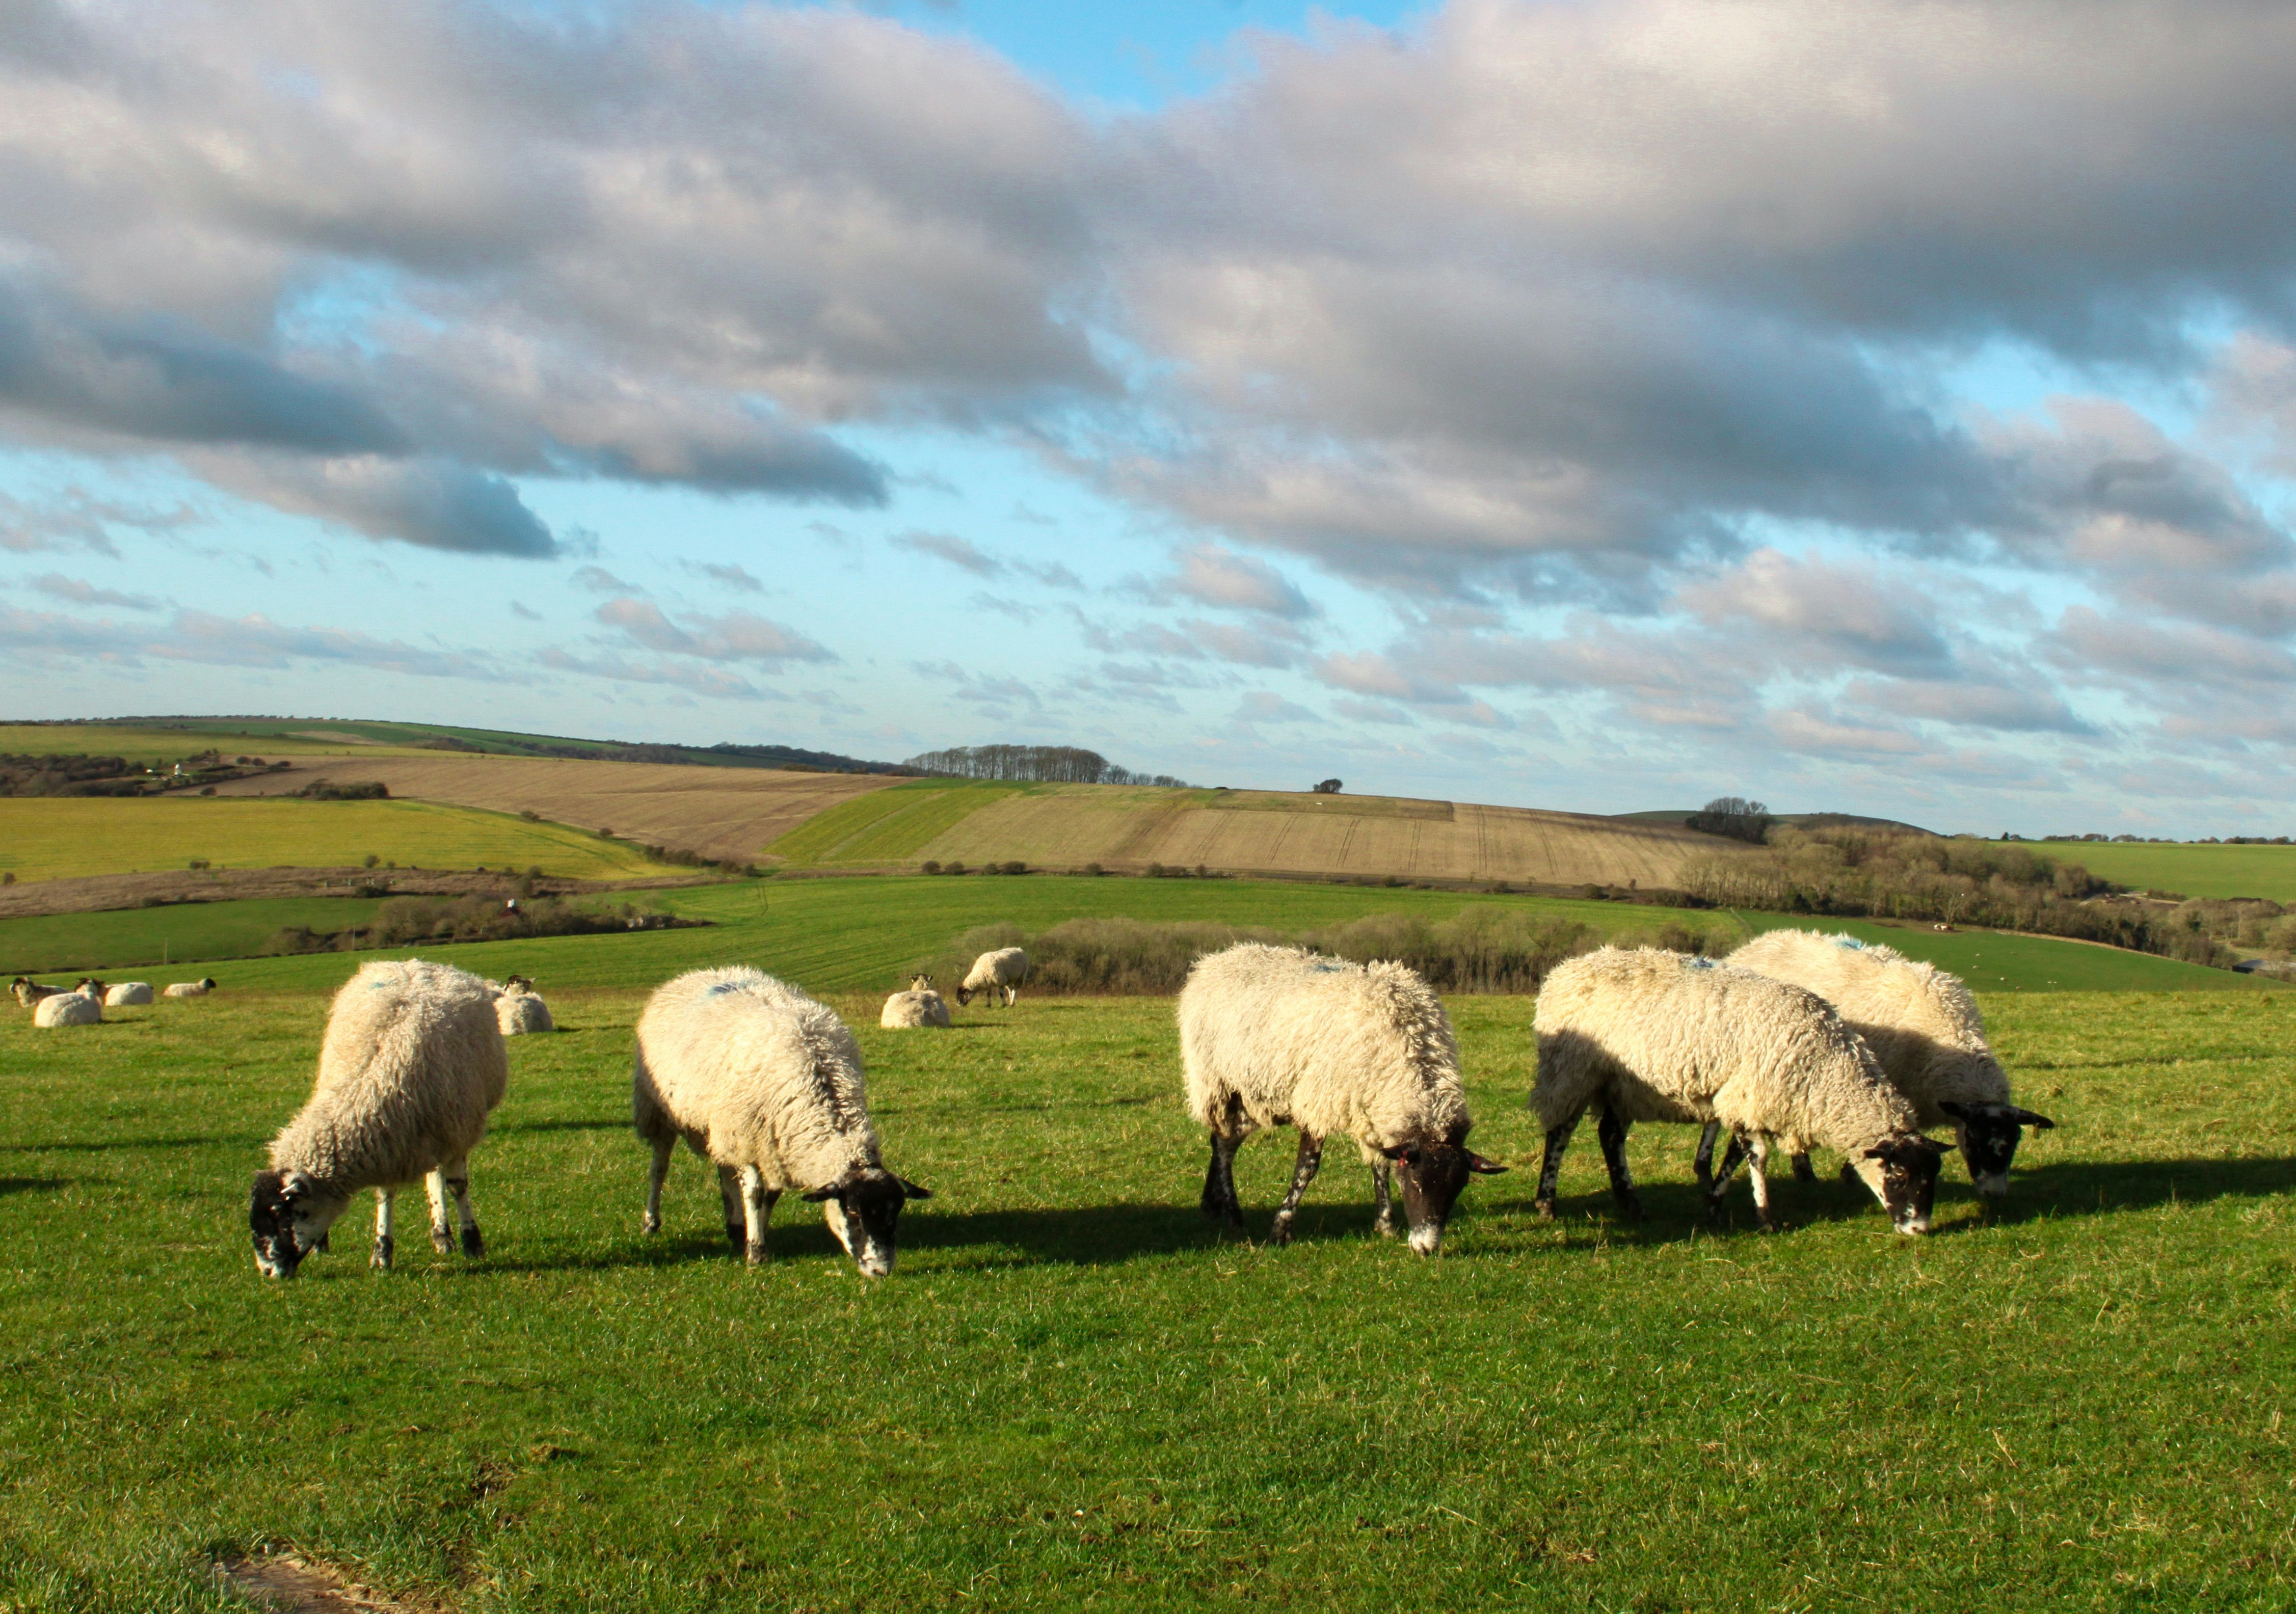 herd of sheep on green grass field under white clouds and blue sky during daytime